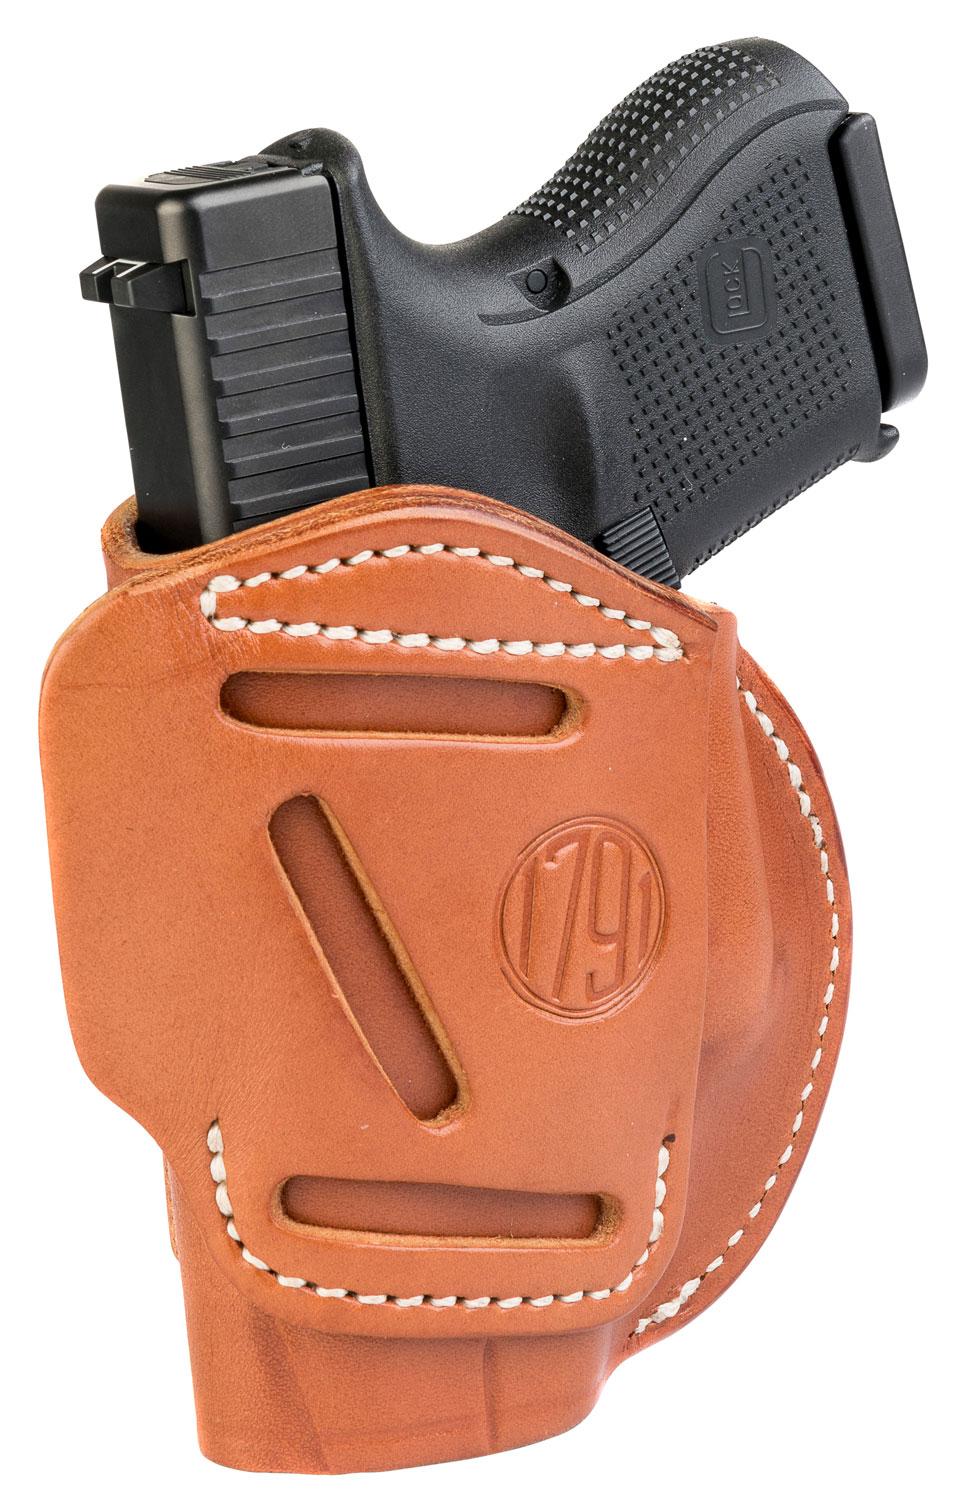  1791 Gunleather 4wh3cbrr 4- Way Iwb/Owb Size 03 Classic Brown Leather Belt Clip Compatible W/Glock 26/Ruger Lc9/S & W M & P Shield 2.0 9/40 Right Hand